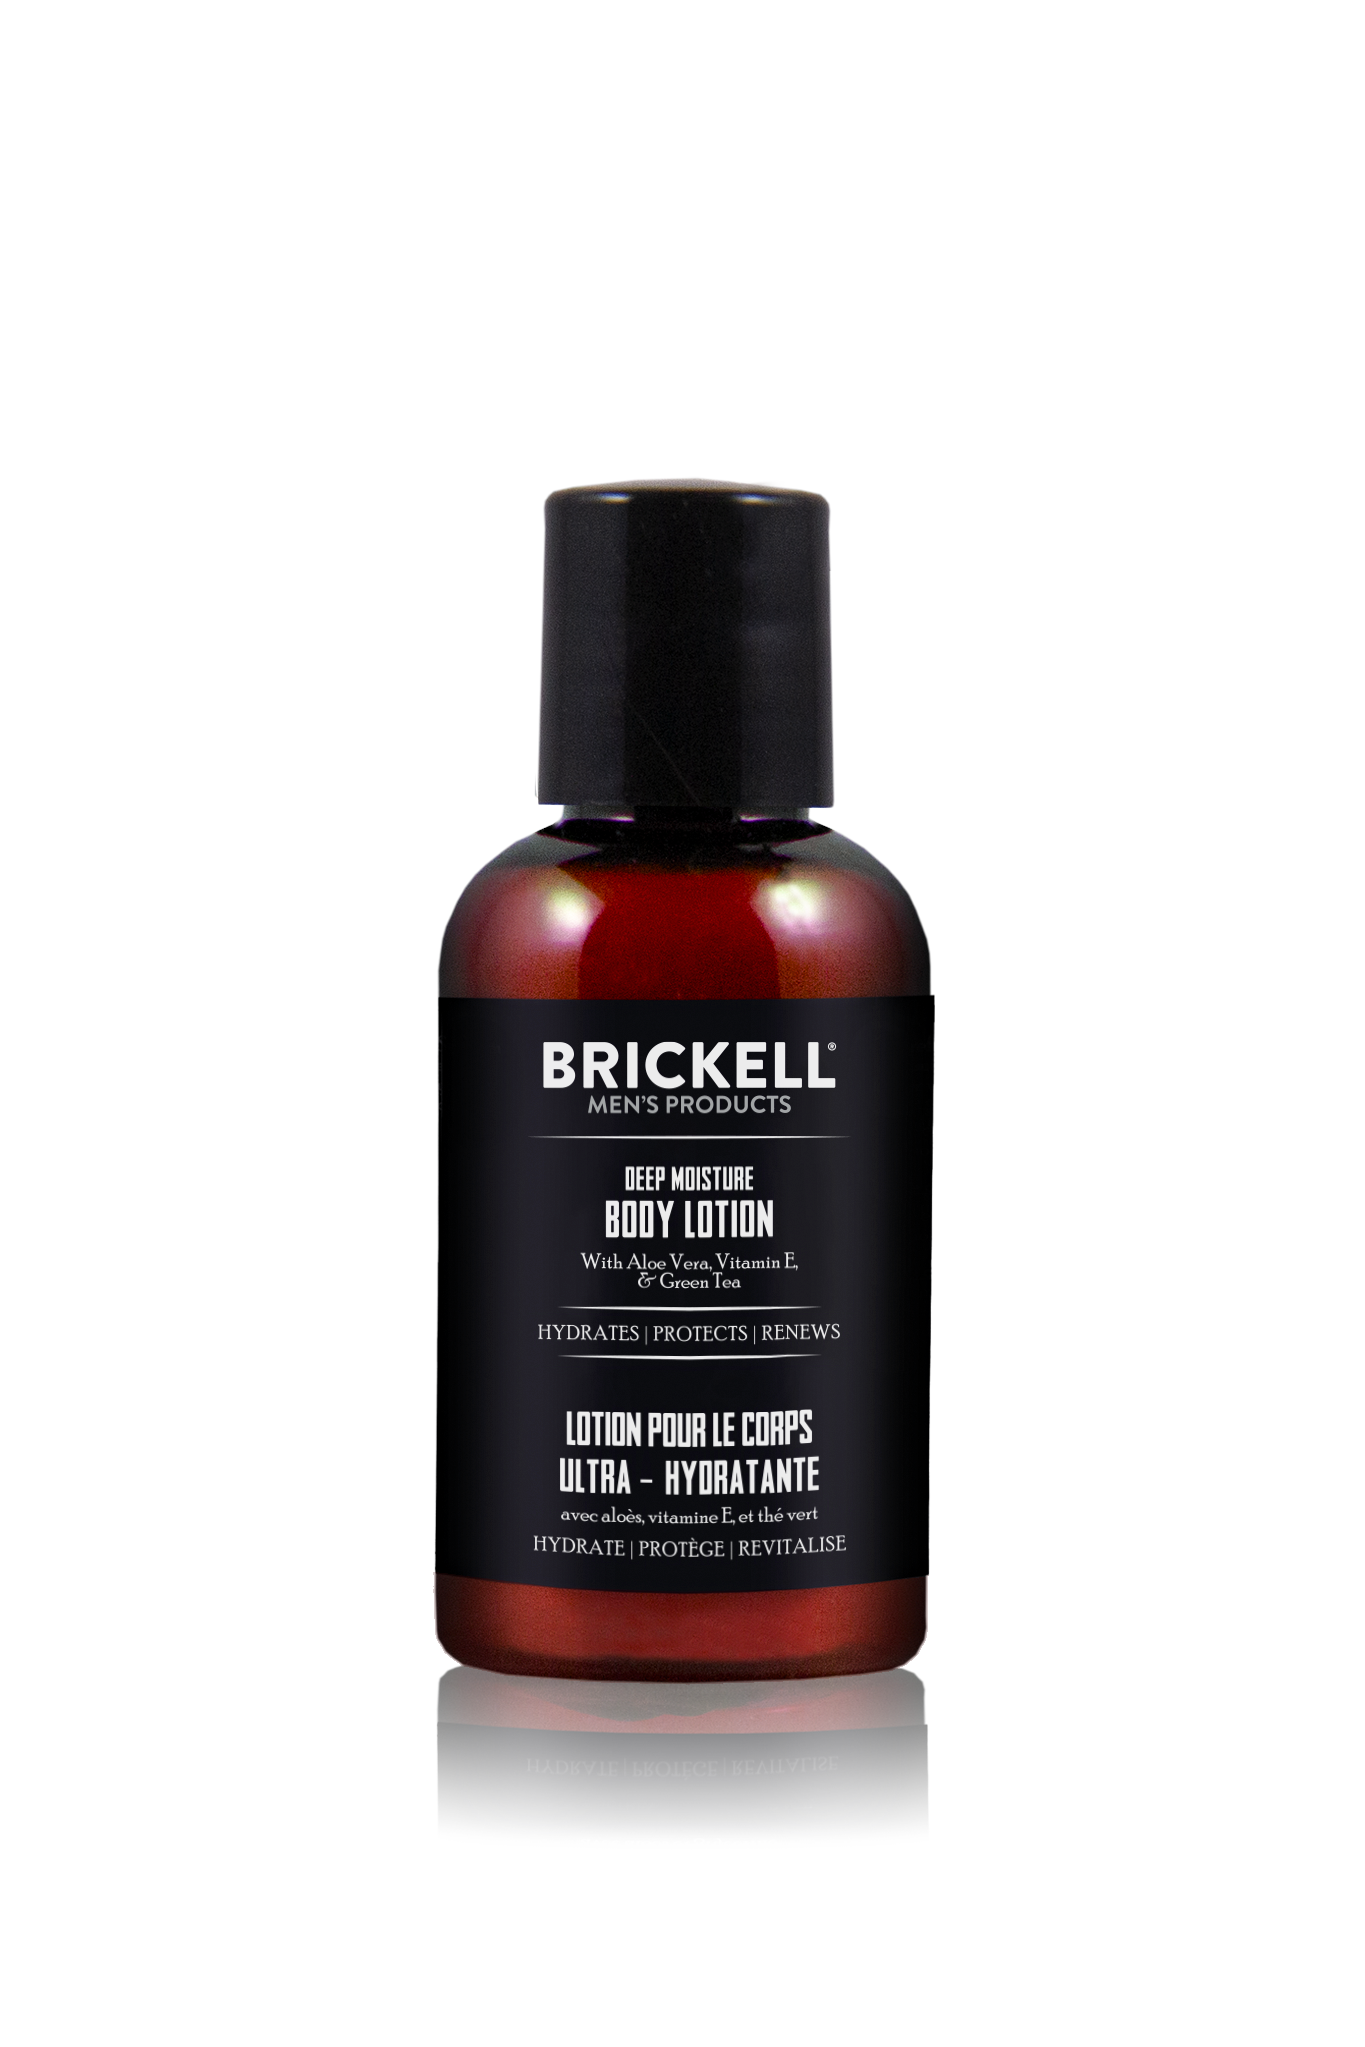 The Best Body Lotion for Men  Brickell Men's Products – Brickell